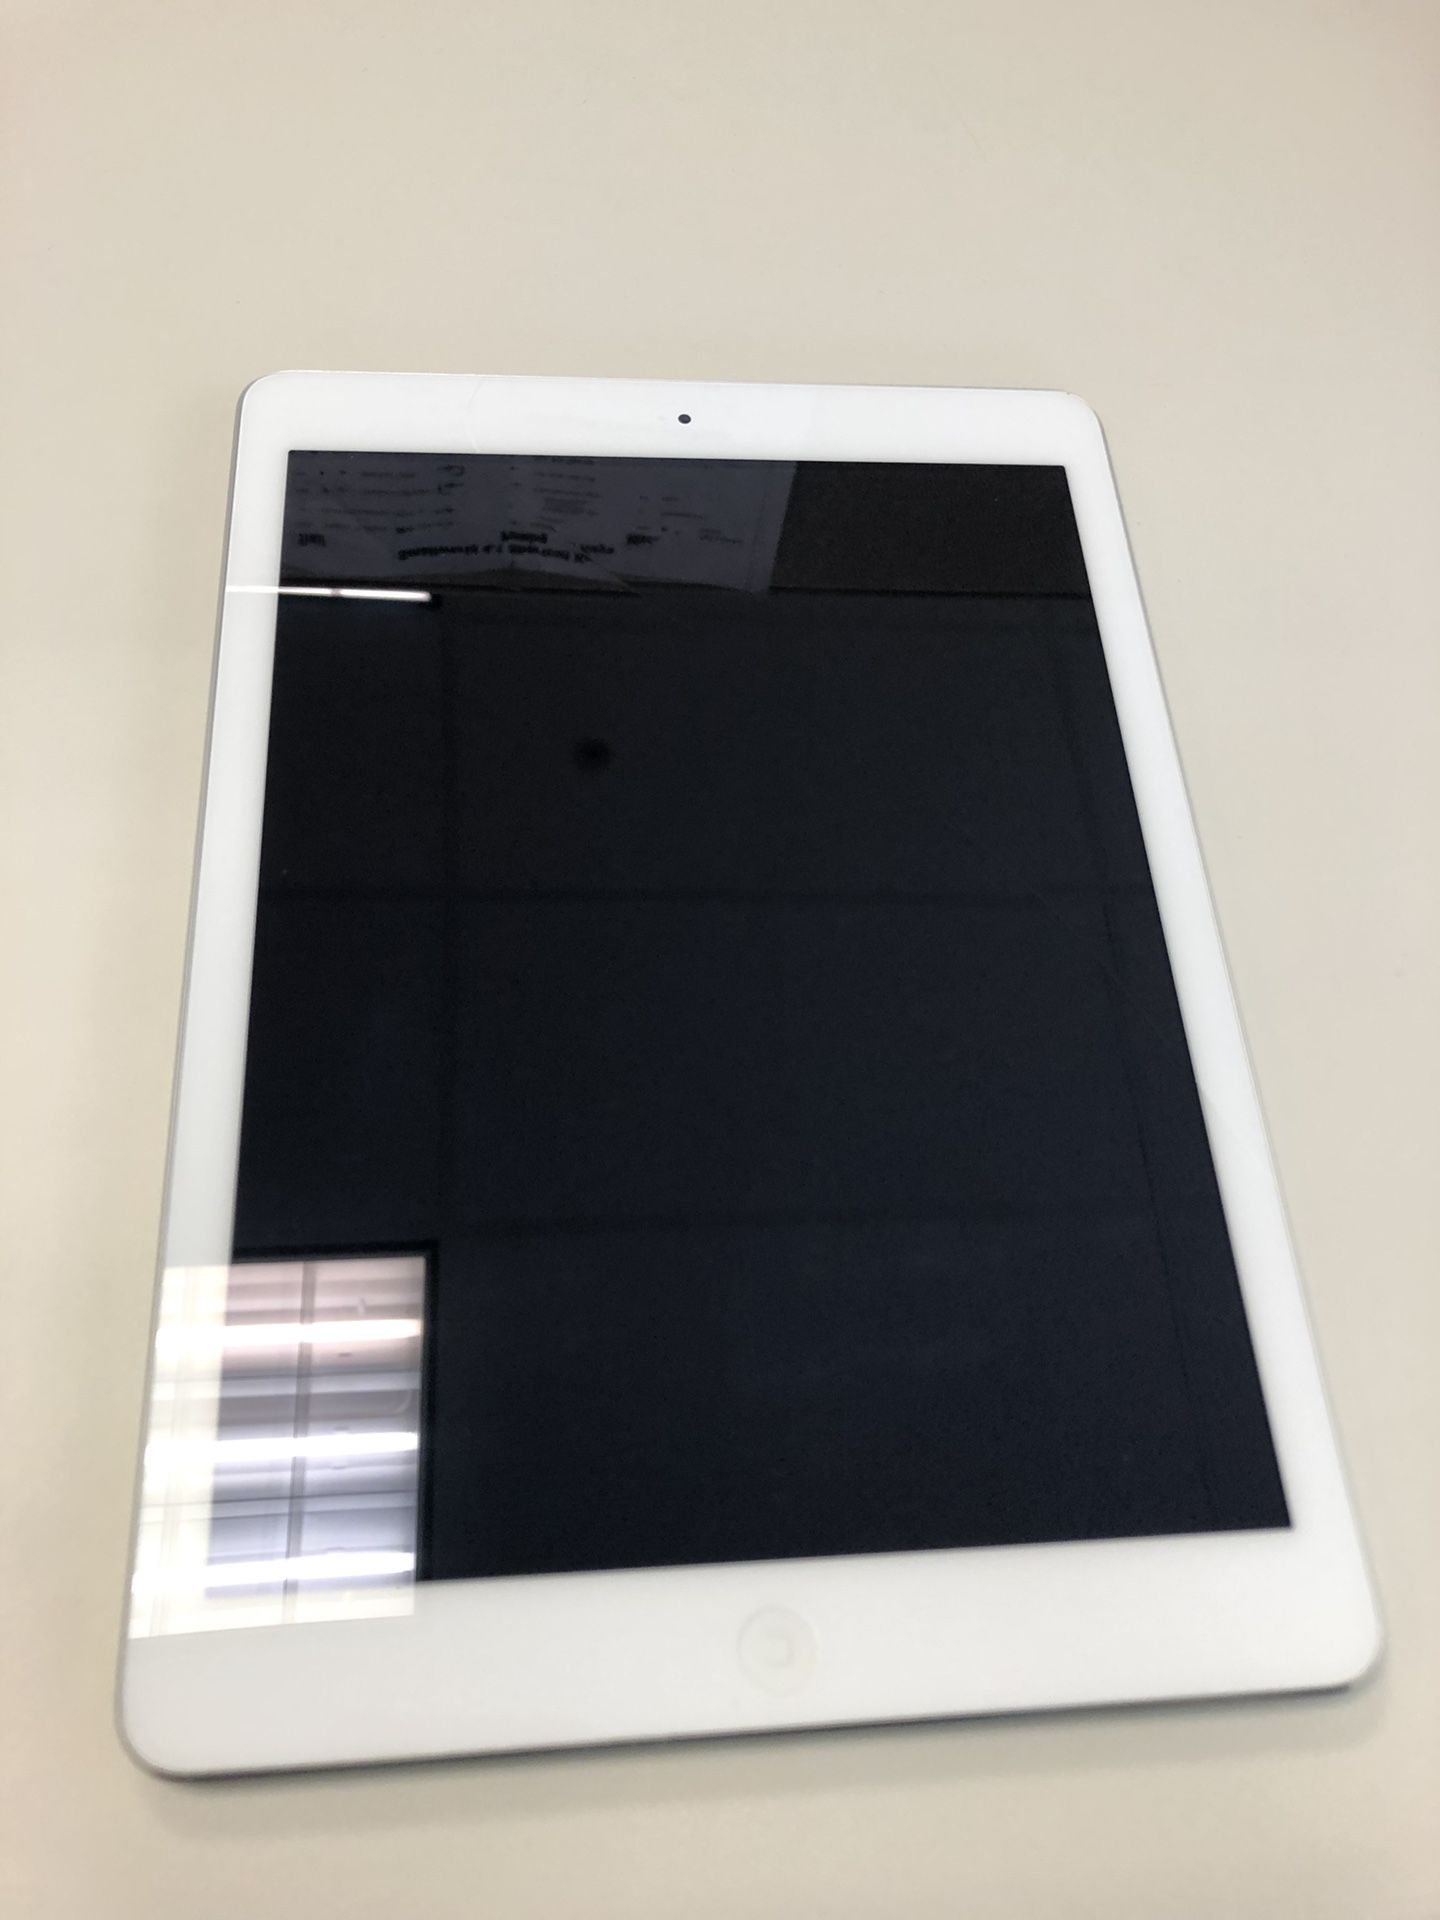 iPad Air WiFi only- silver